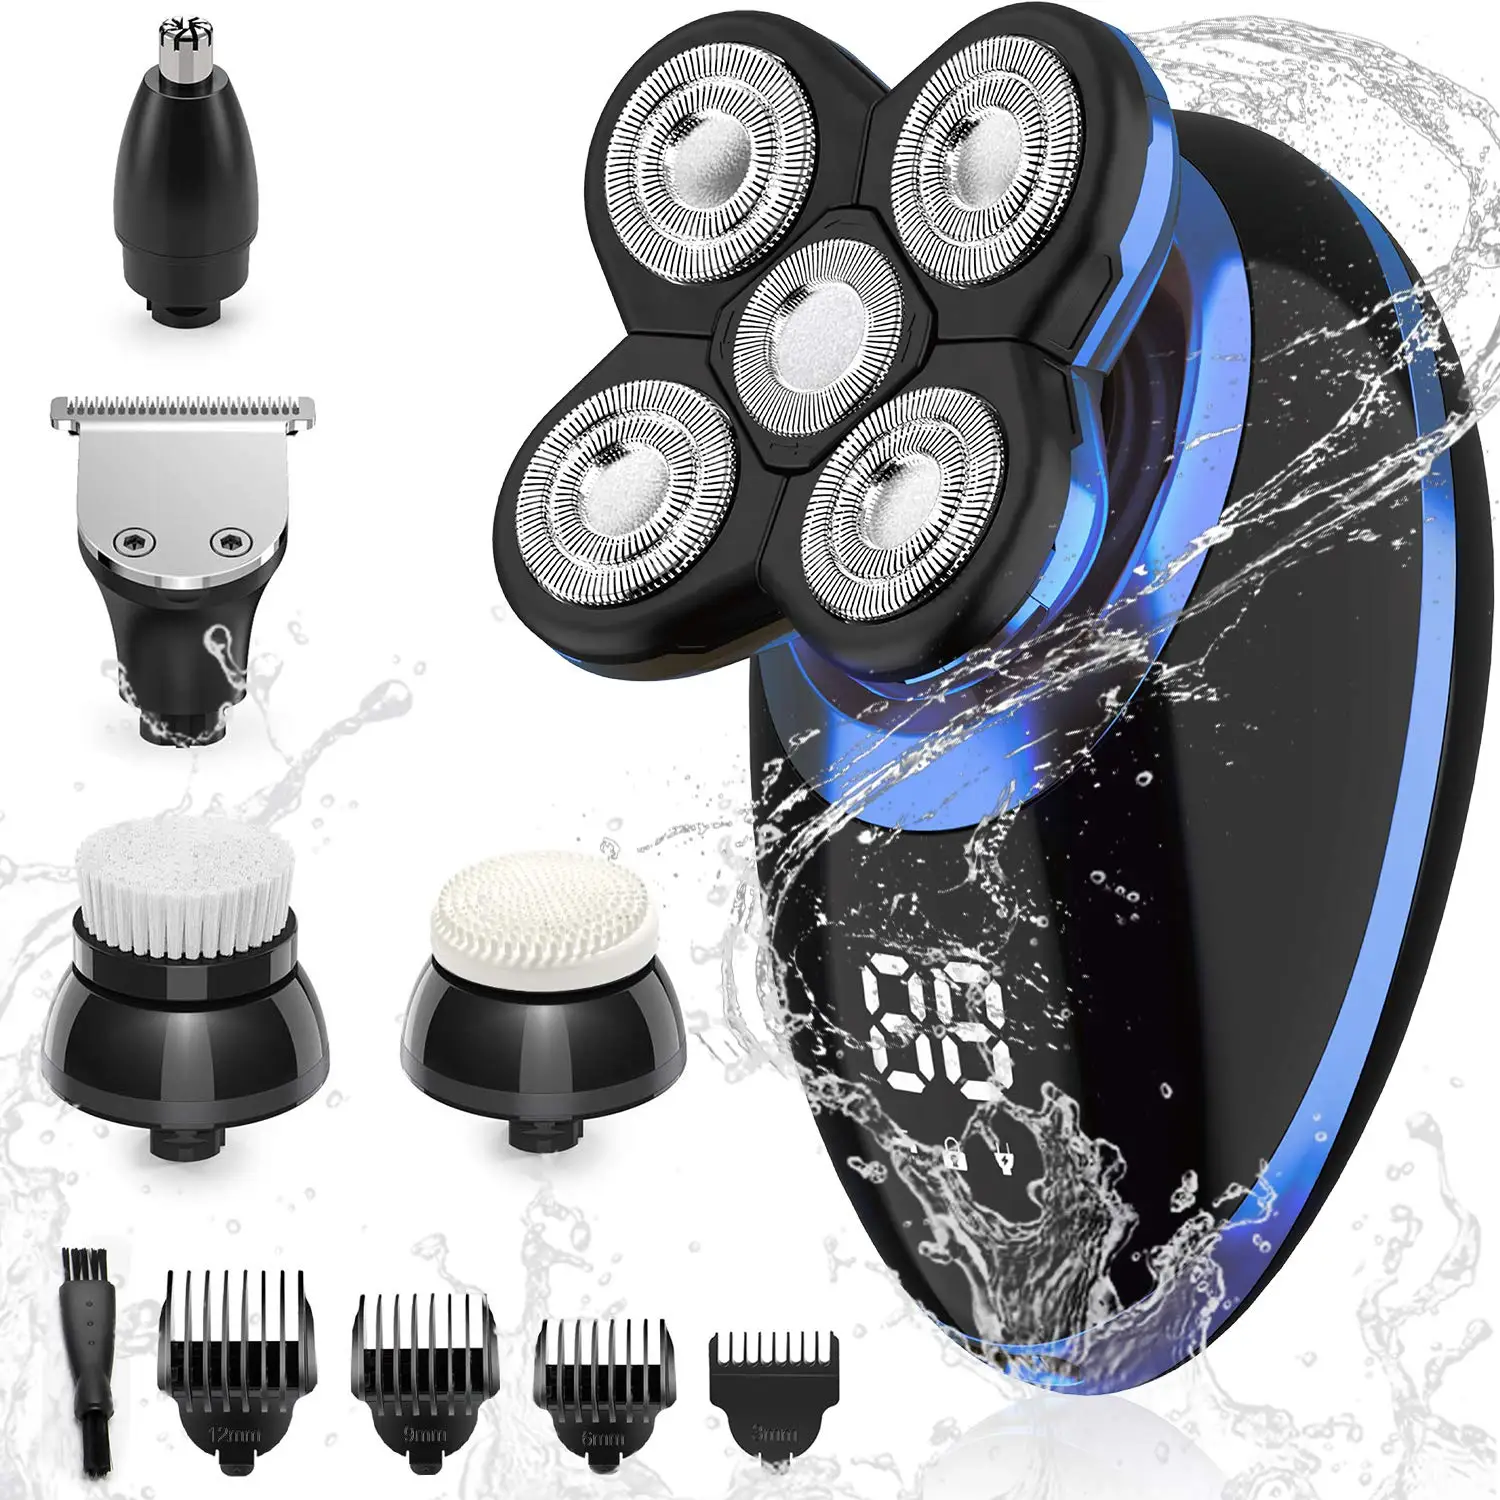 

Electric Shavers for Men Bald Head Razors Shaving 5 in 1 haircut USB Rechargeable LED Cordless Rotary Shaver Grooming Kit